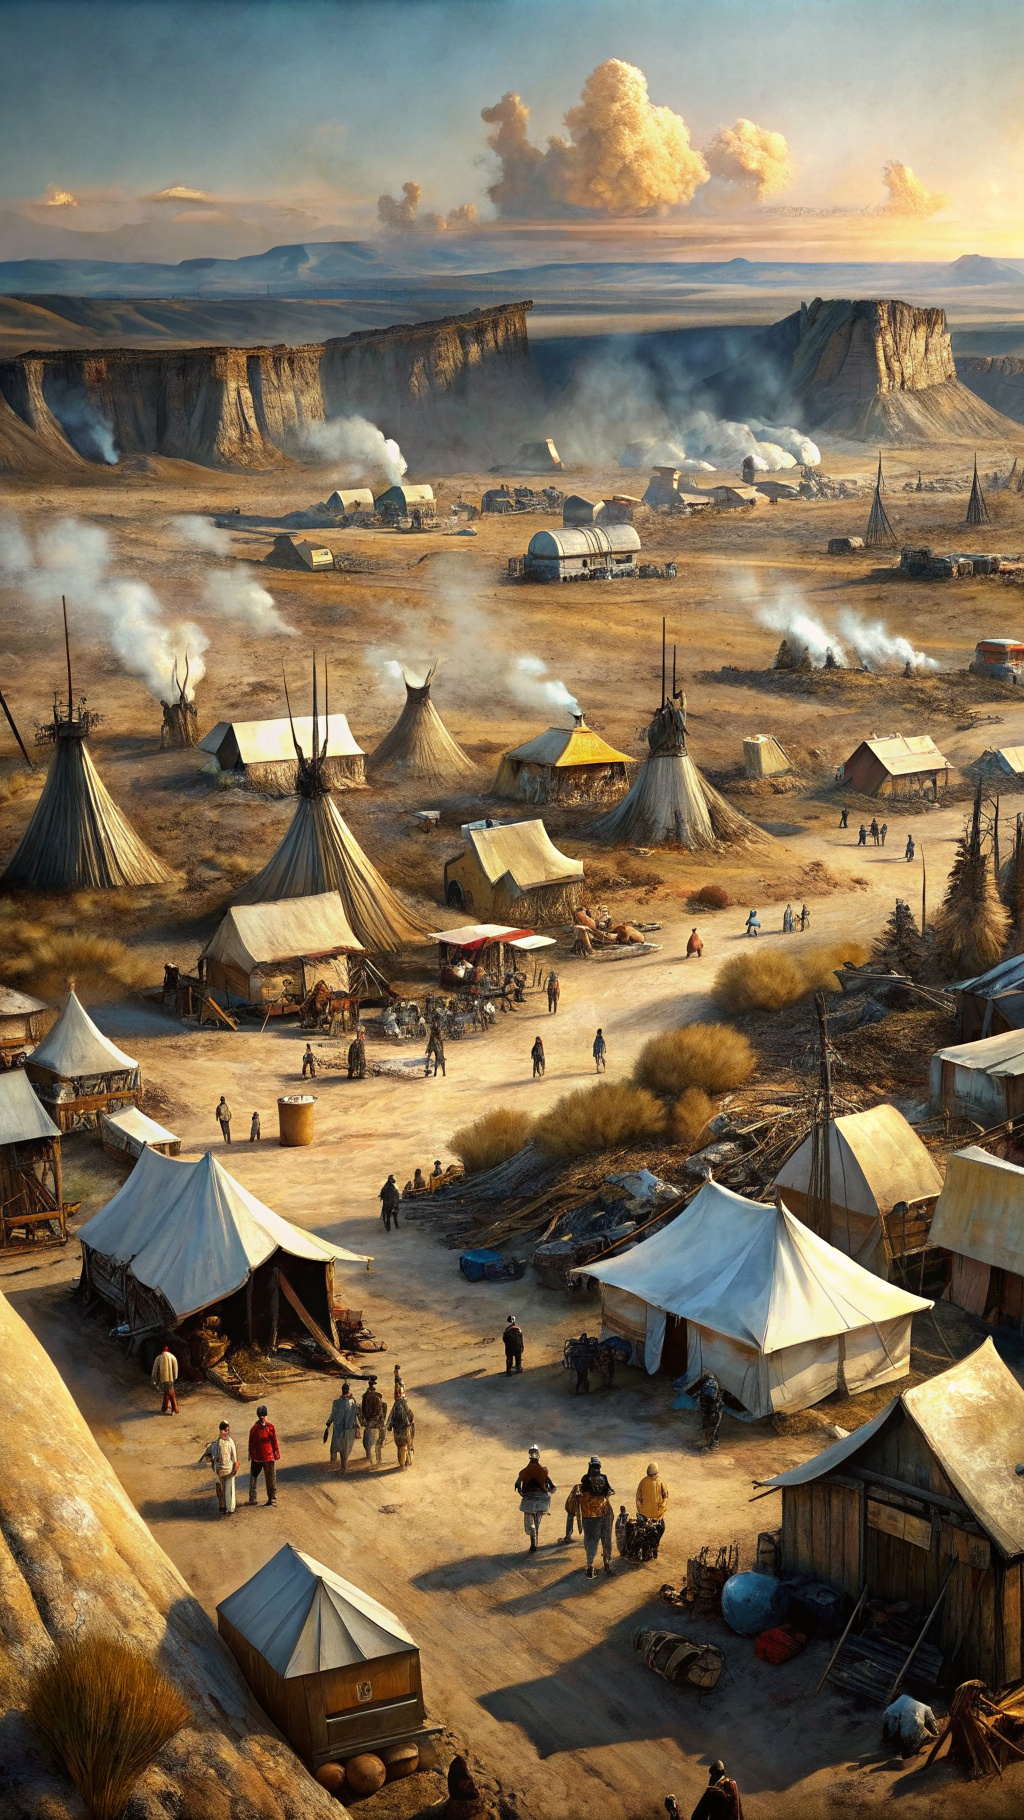 A bustling mining camp has sprung up at the edge of the Great Sioux Reservation, with tents, wagons, and makeshift structures dotting the landscape.
Action: White miners, armed with pickaxes and shovels, are shown prospecting for gold amidst the rugged terrain. Their presence represents the encroachment of outsiders onto Native American land and the disruption of traditional ways of life.